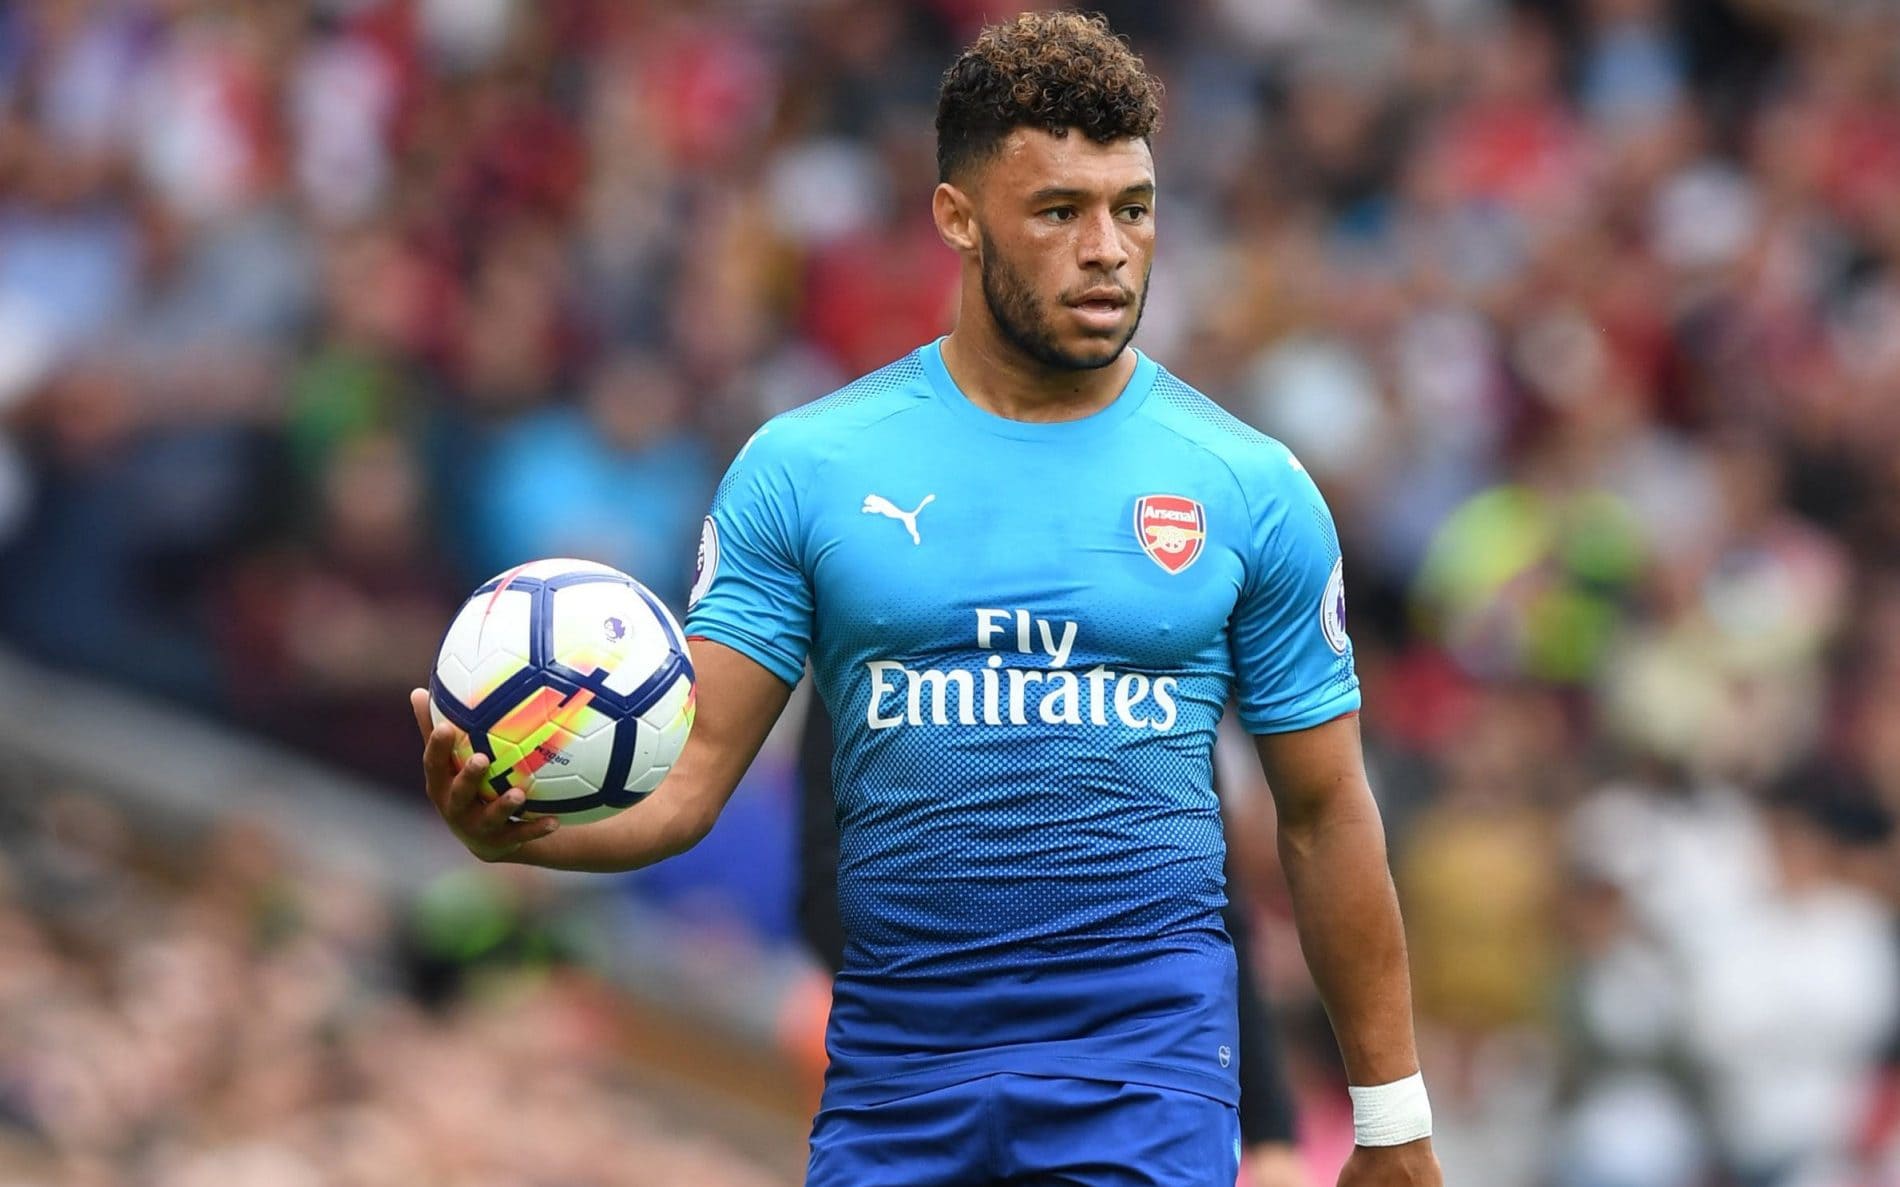 Alex Oxlade-Chamberlain reportedly rejects Chelsea over concerns about his preferred position